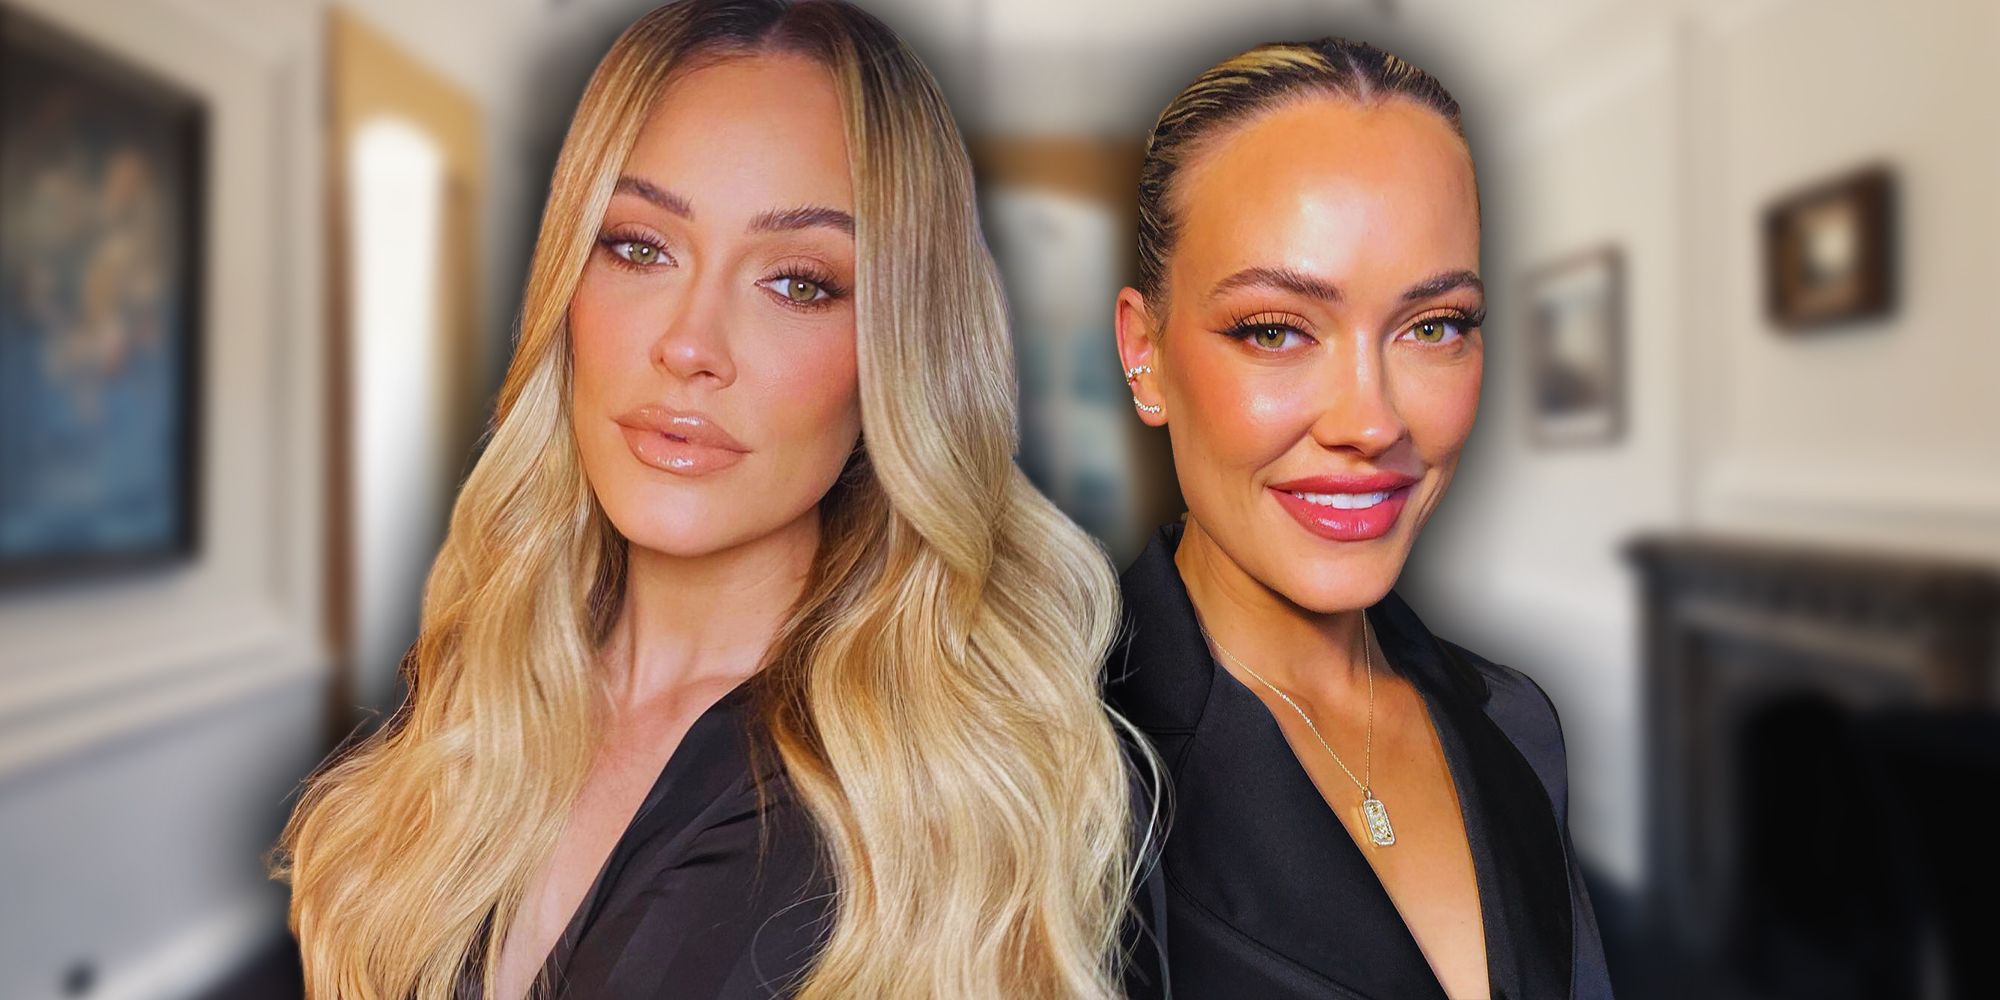 Side by side images of DWTS pro dancer Peta Murgatroyd